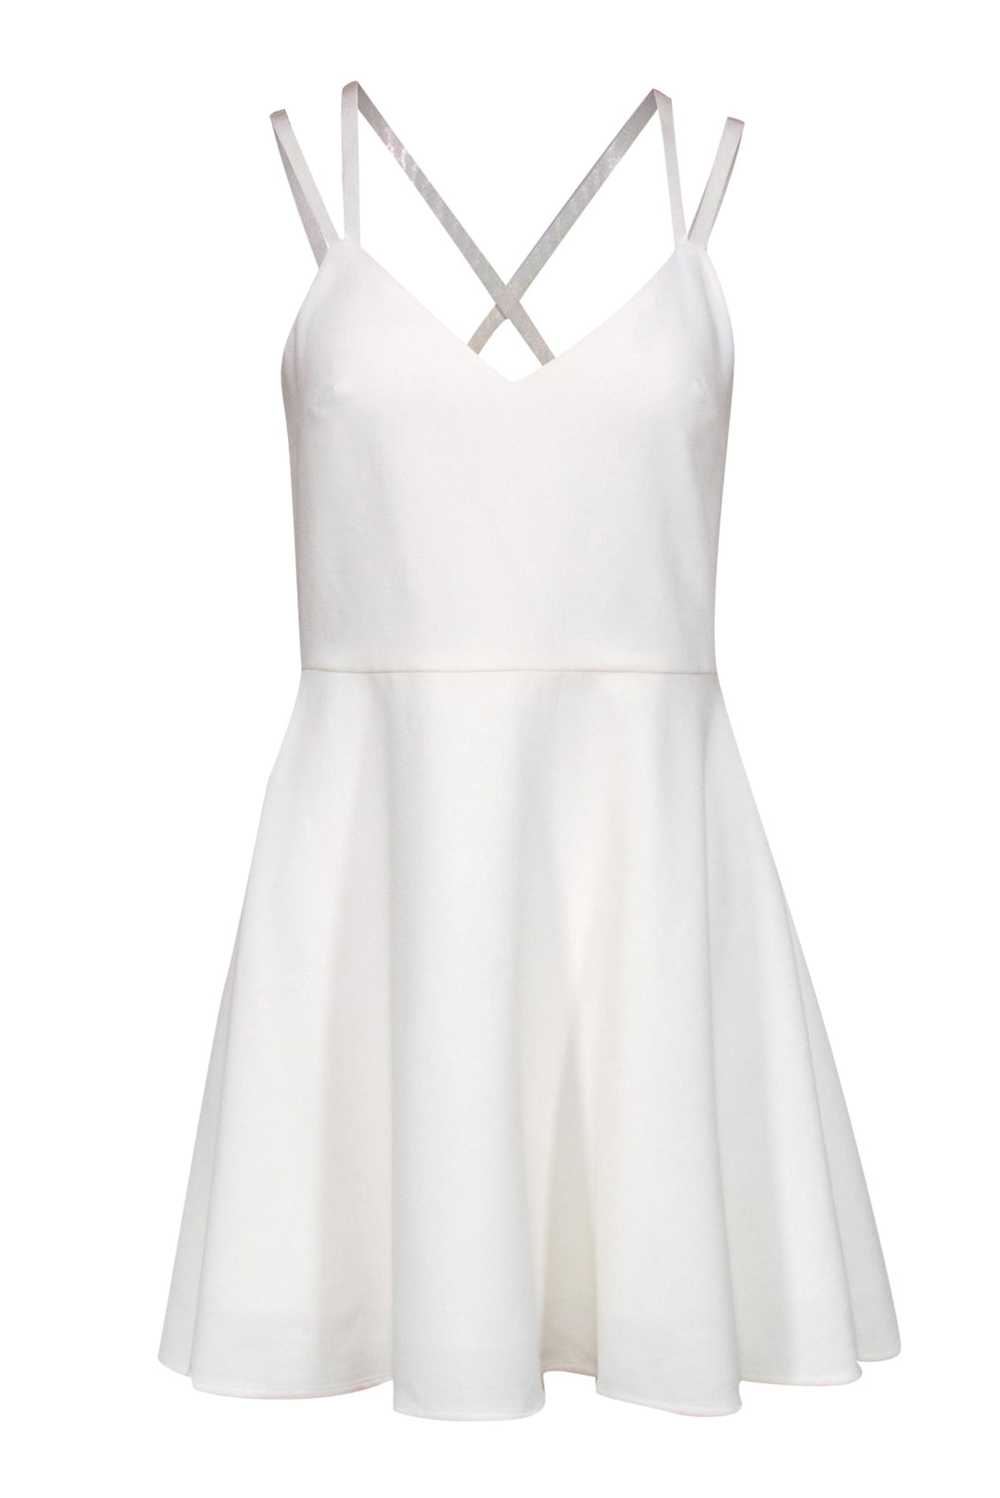 French Connection - Ivory Crisscross Strap Fit & … - image 1